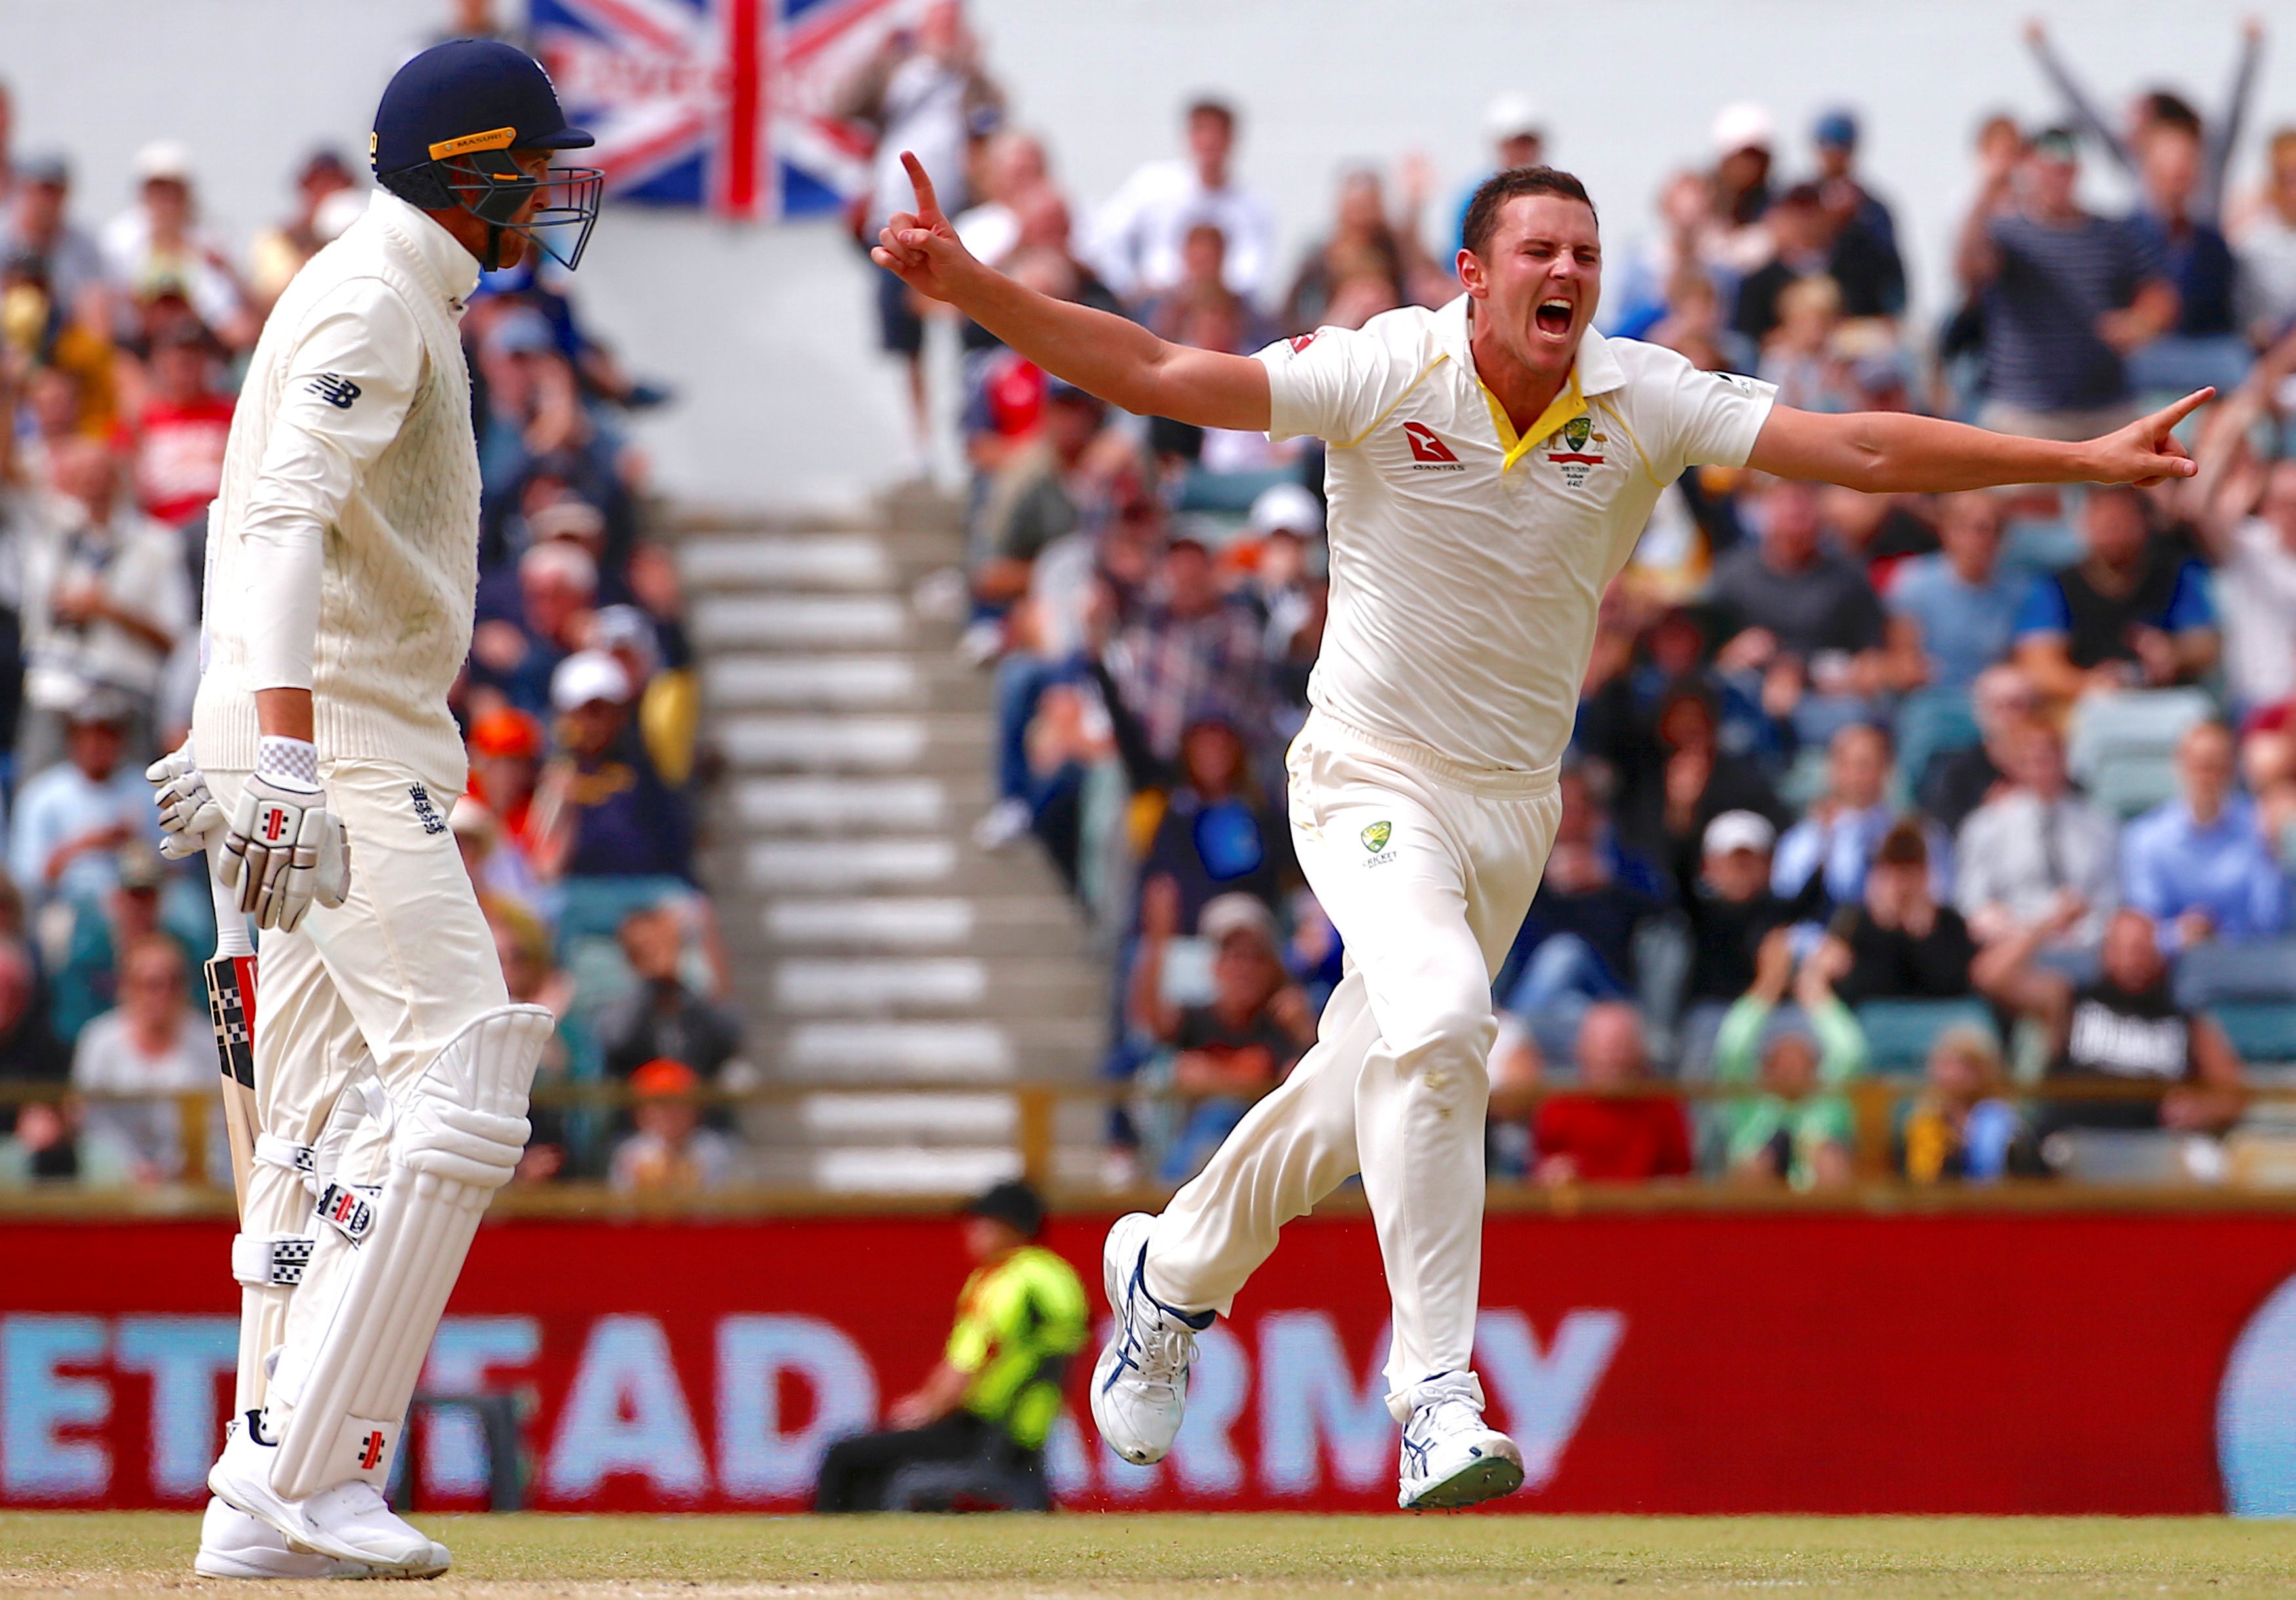 Australia's Josh Hazlewood celebrates taking the wicket of England's Craig Overton during the fifth day of the third Ashes test. Photo: Reuters